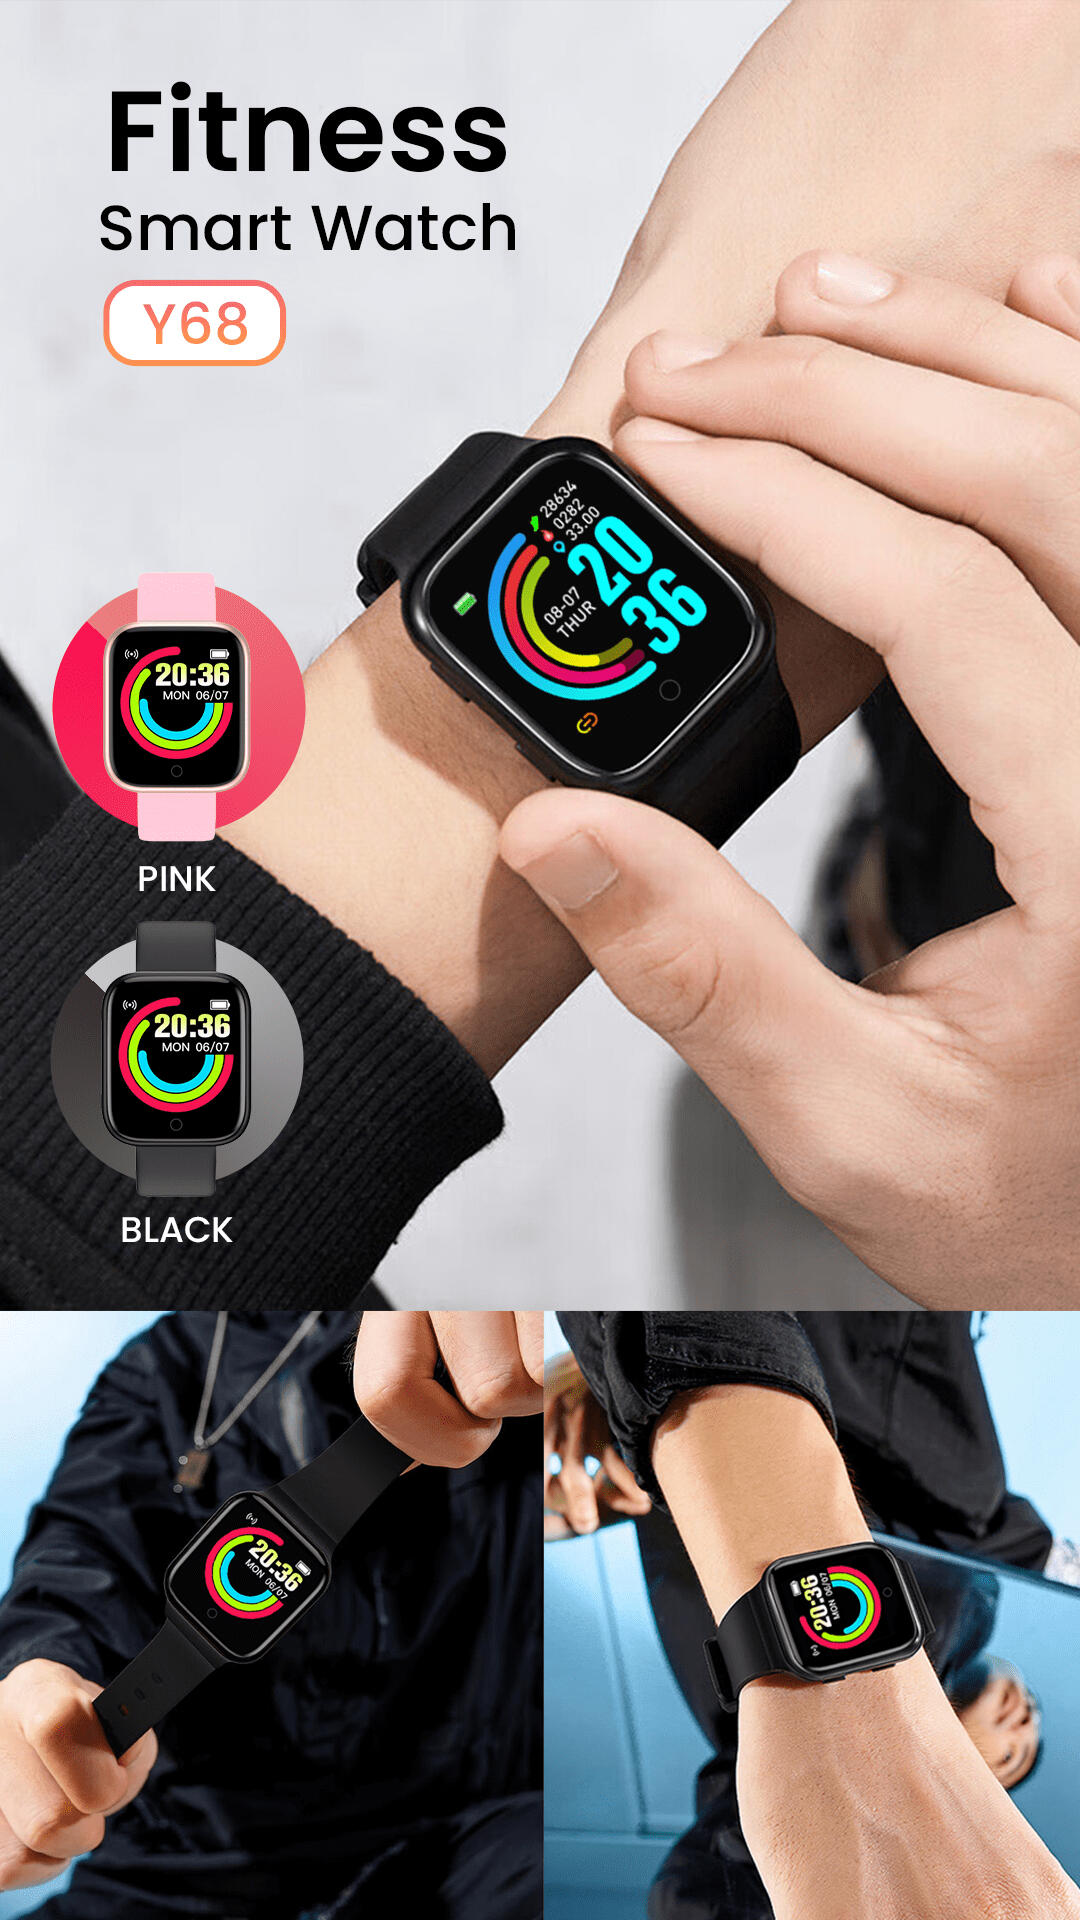 2 colors available for Y68 Smartwatch; rose gold pink and black